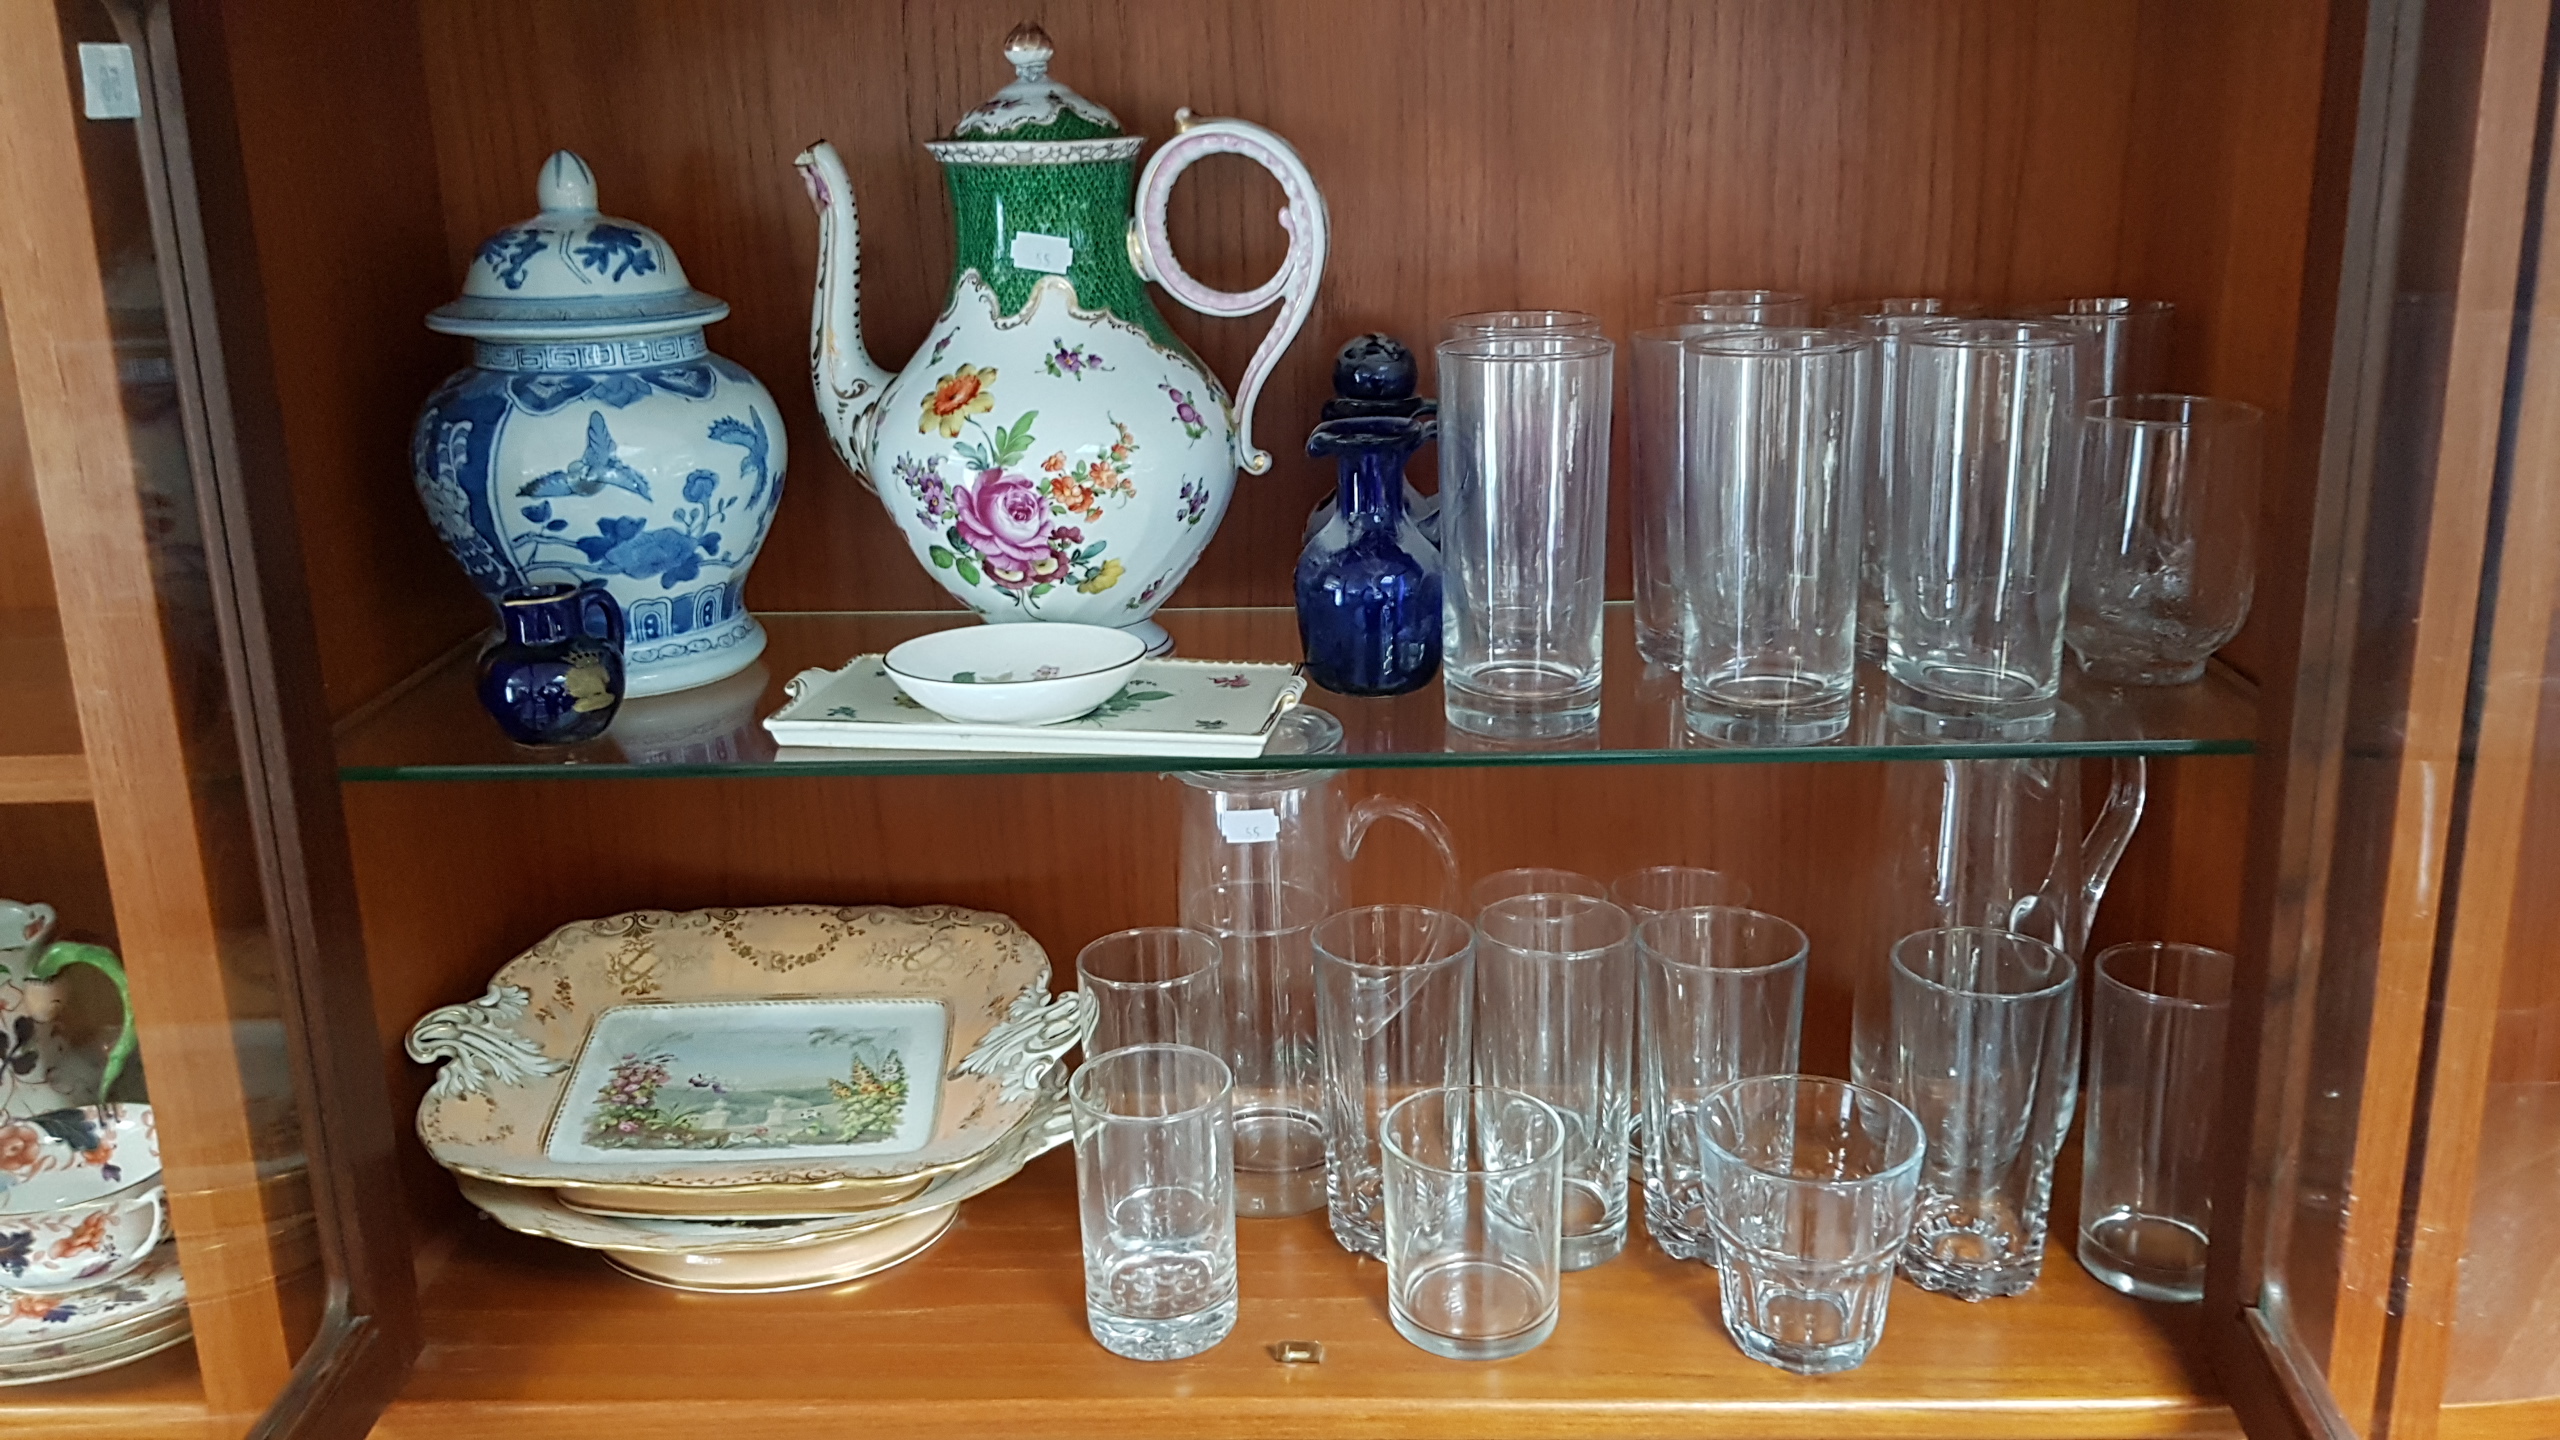 Various items of decorative china, pottery & glassware, part w.a.f.